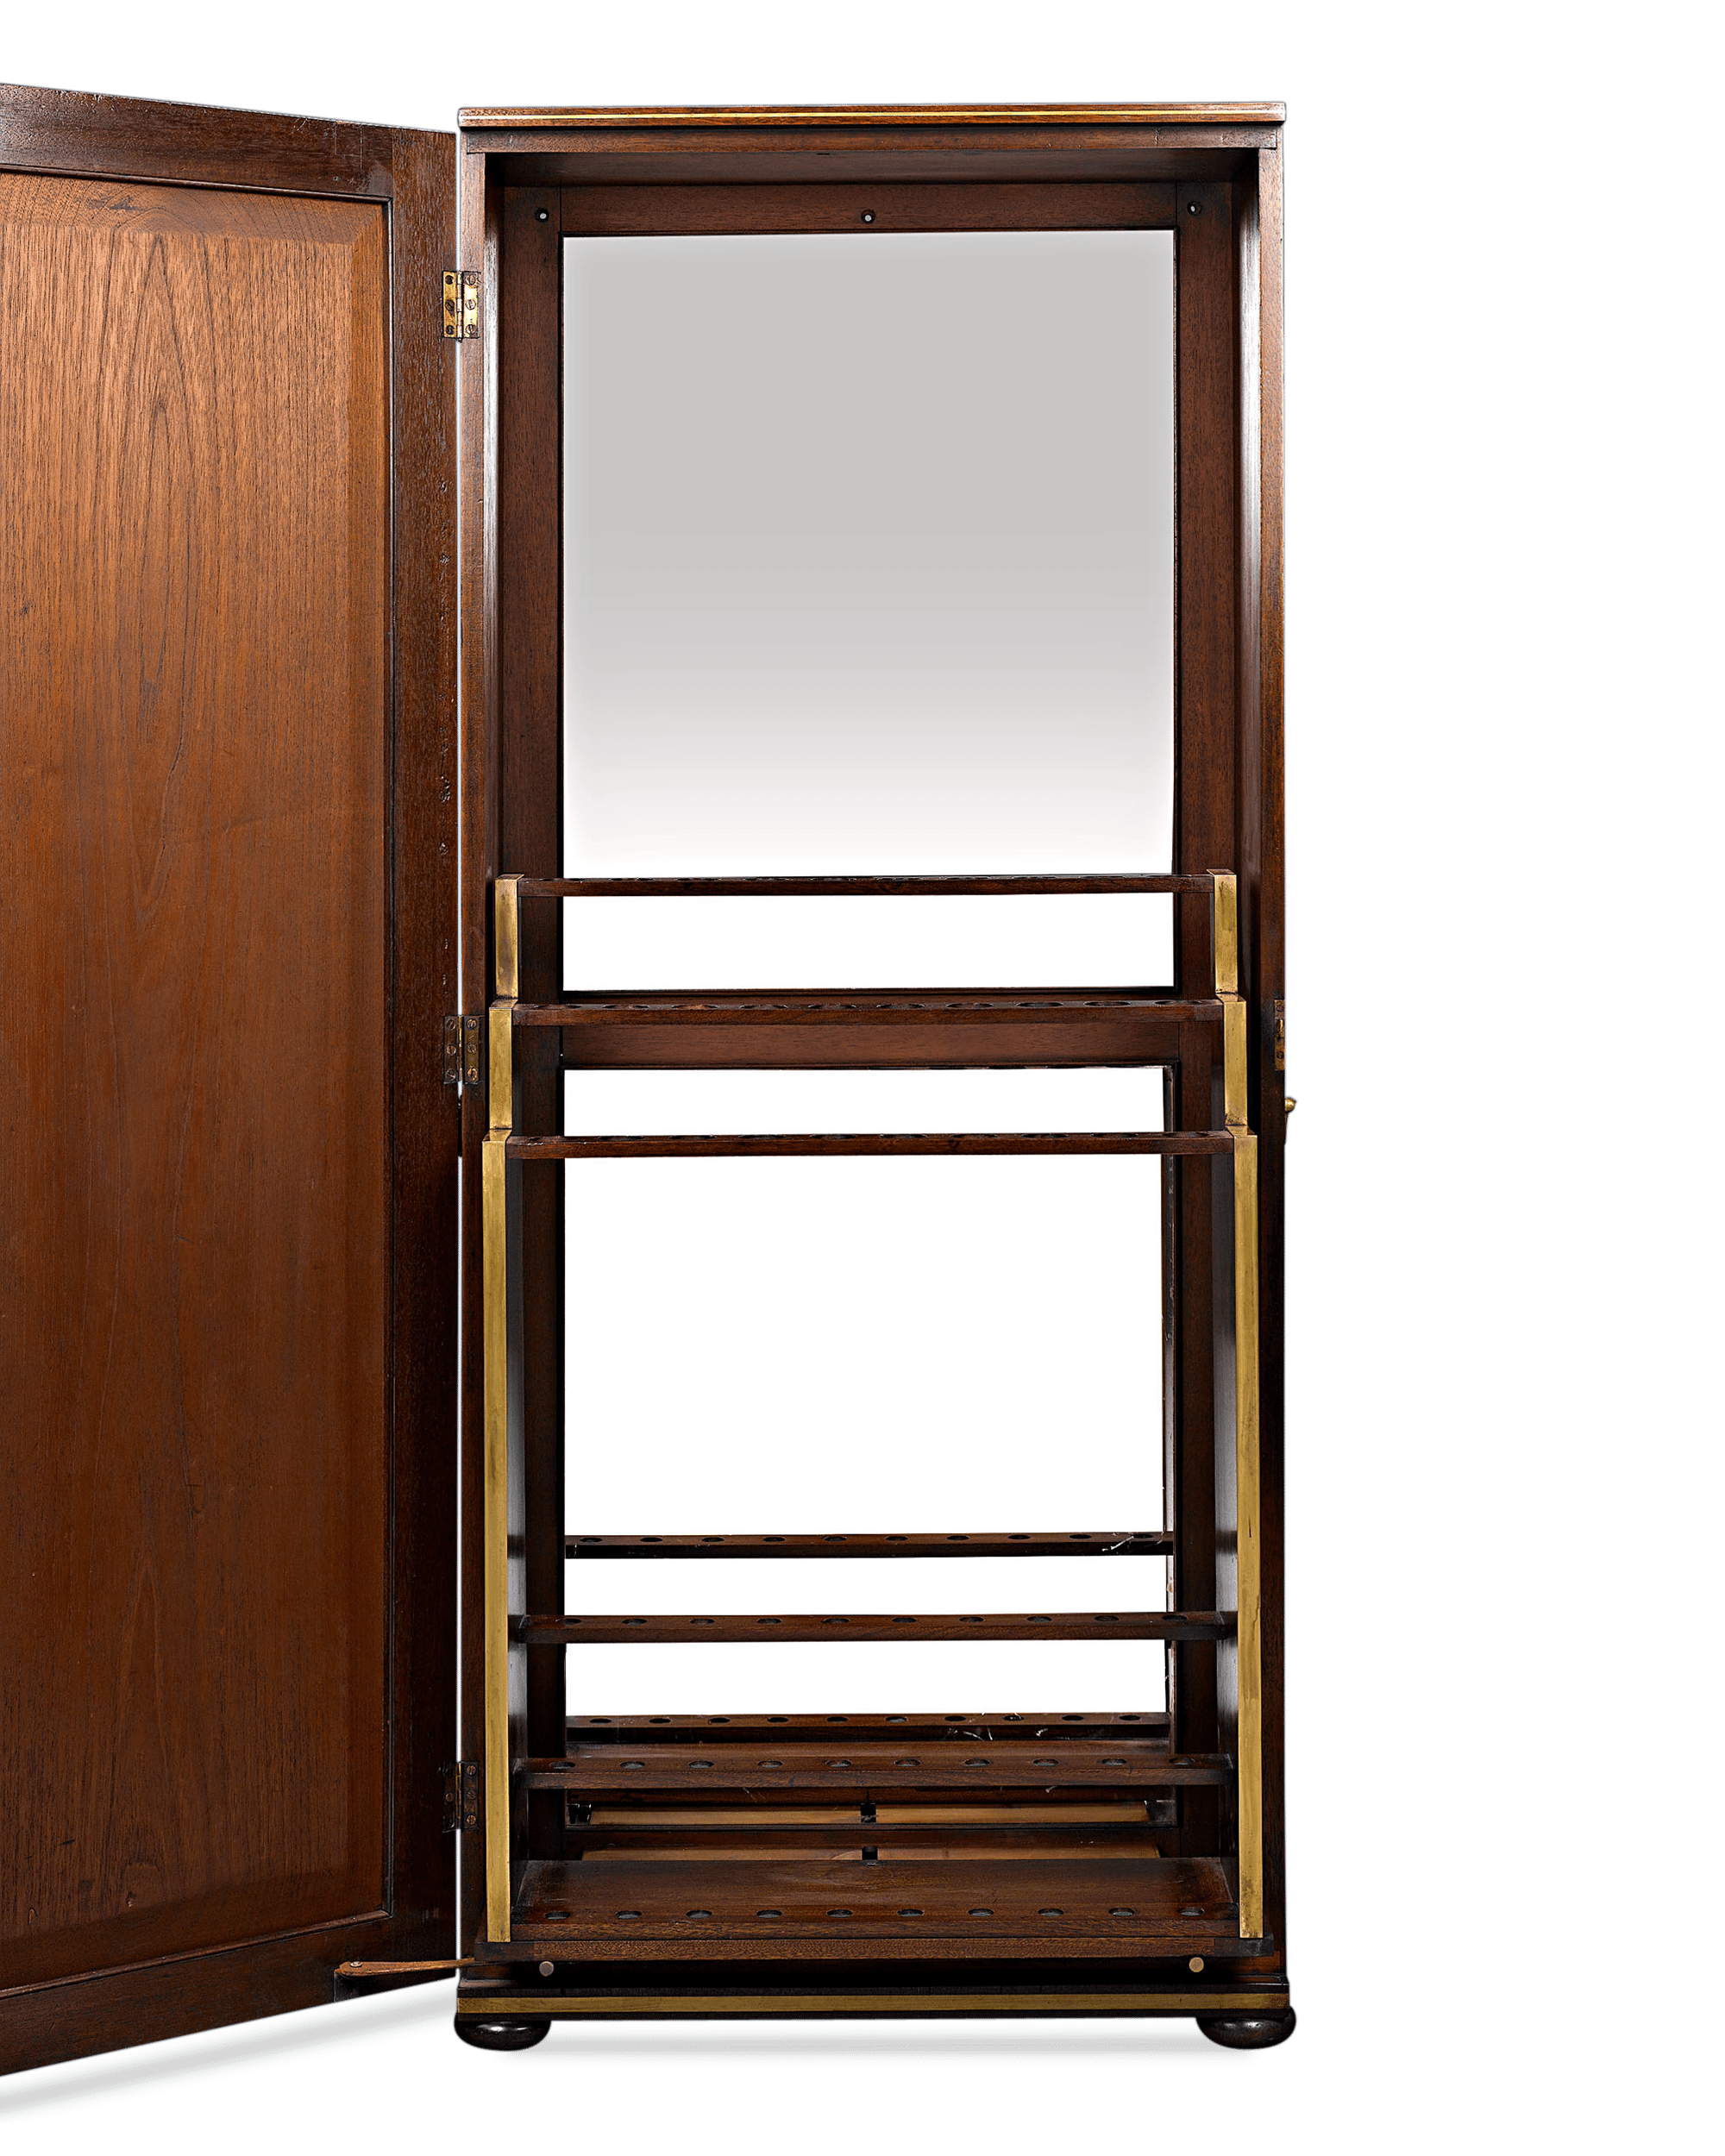 A three-tiered rack emerges when the door is opened